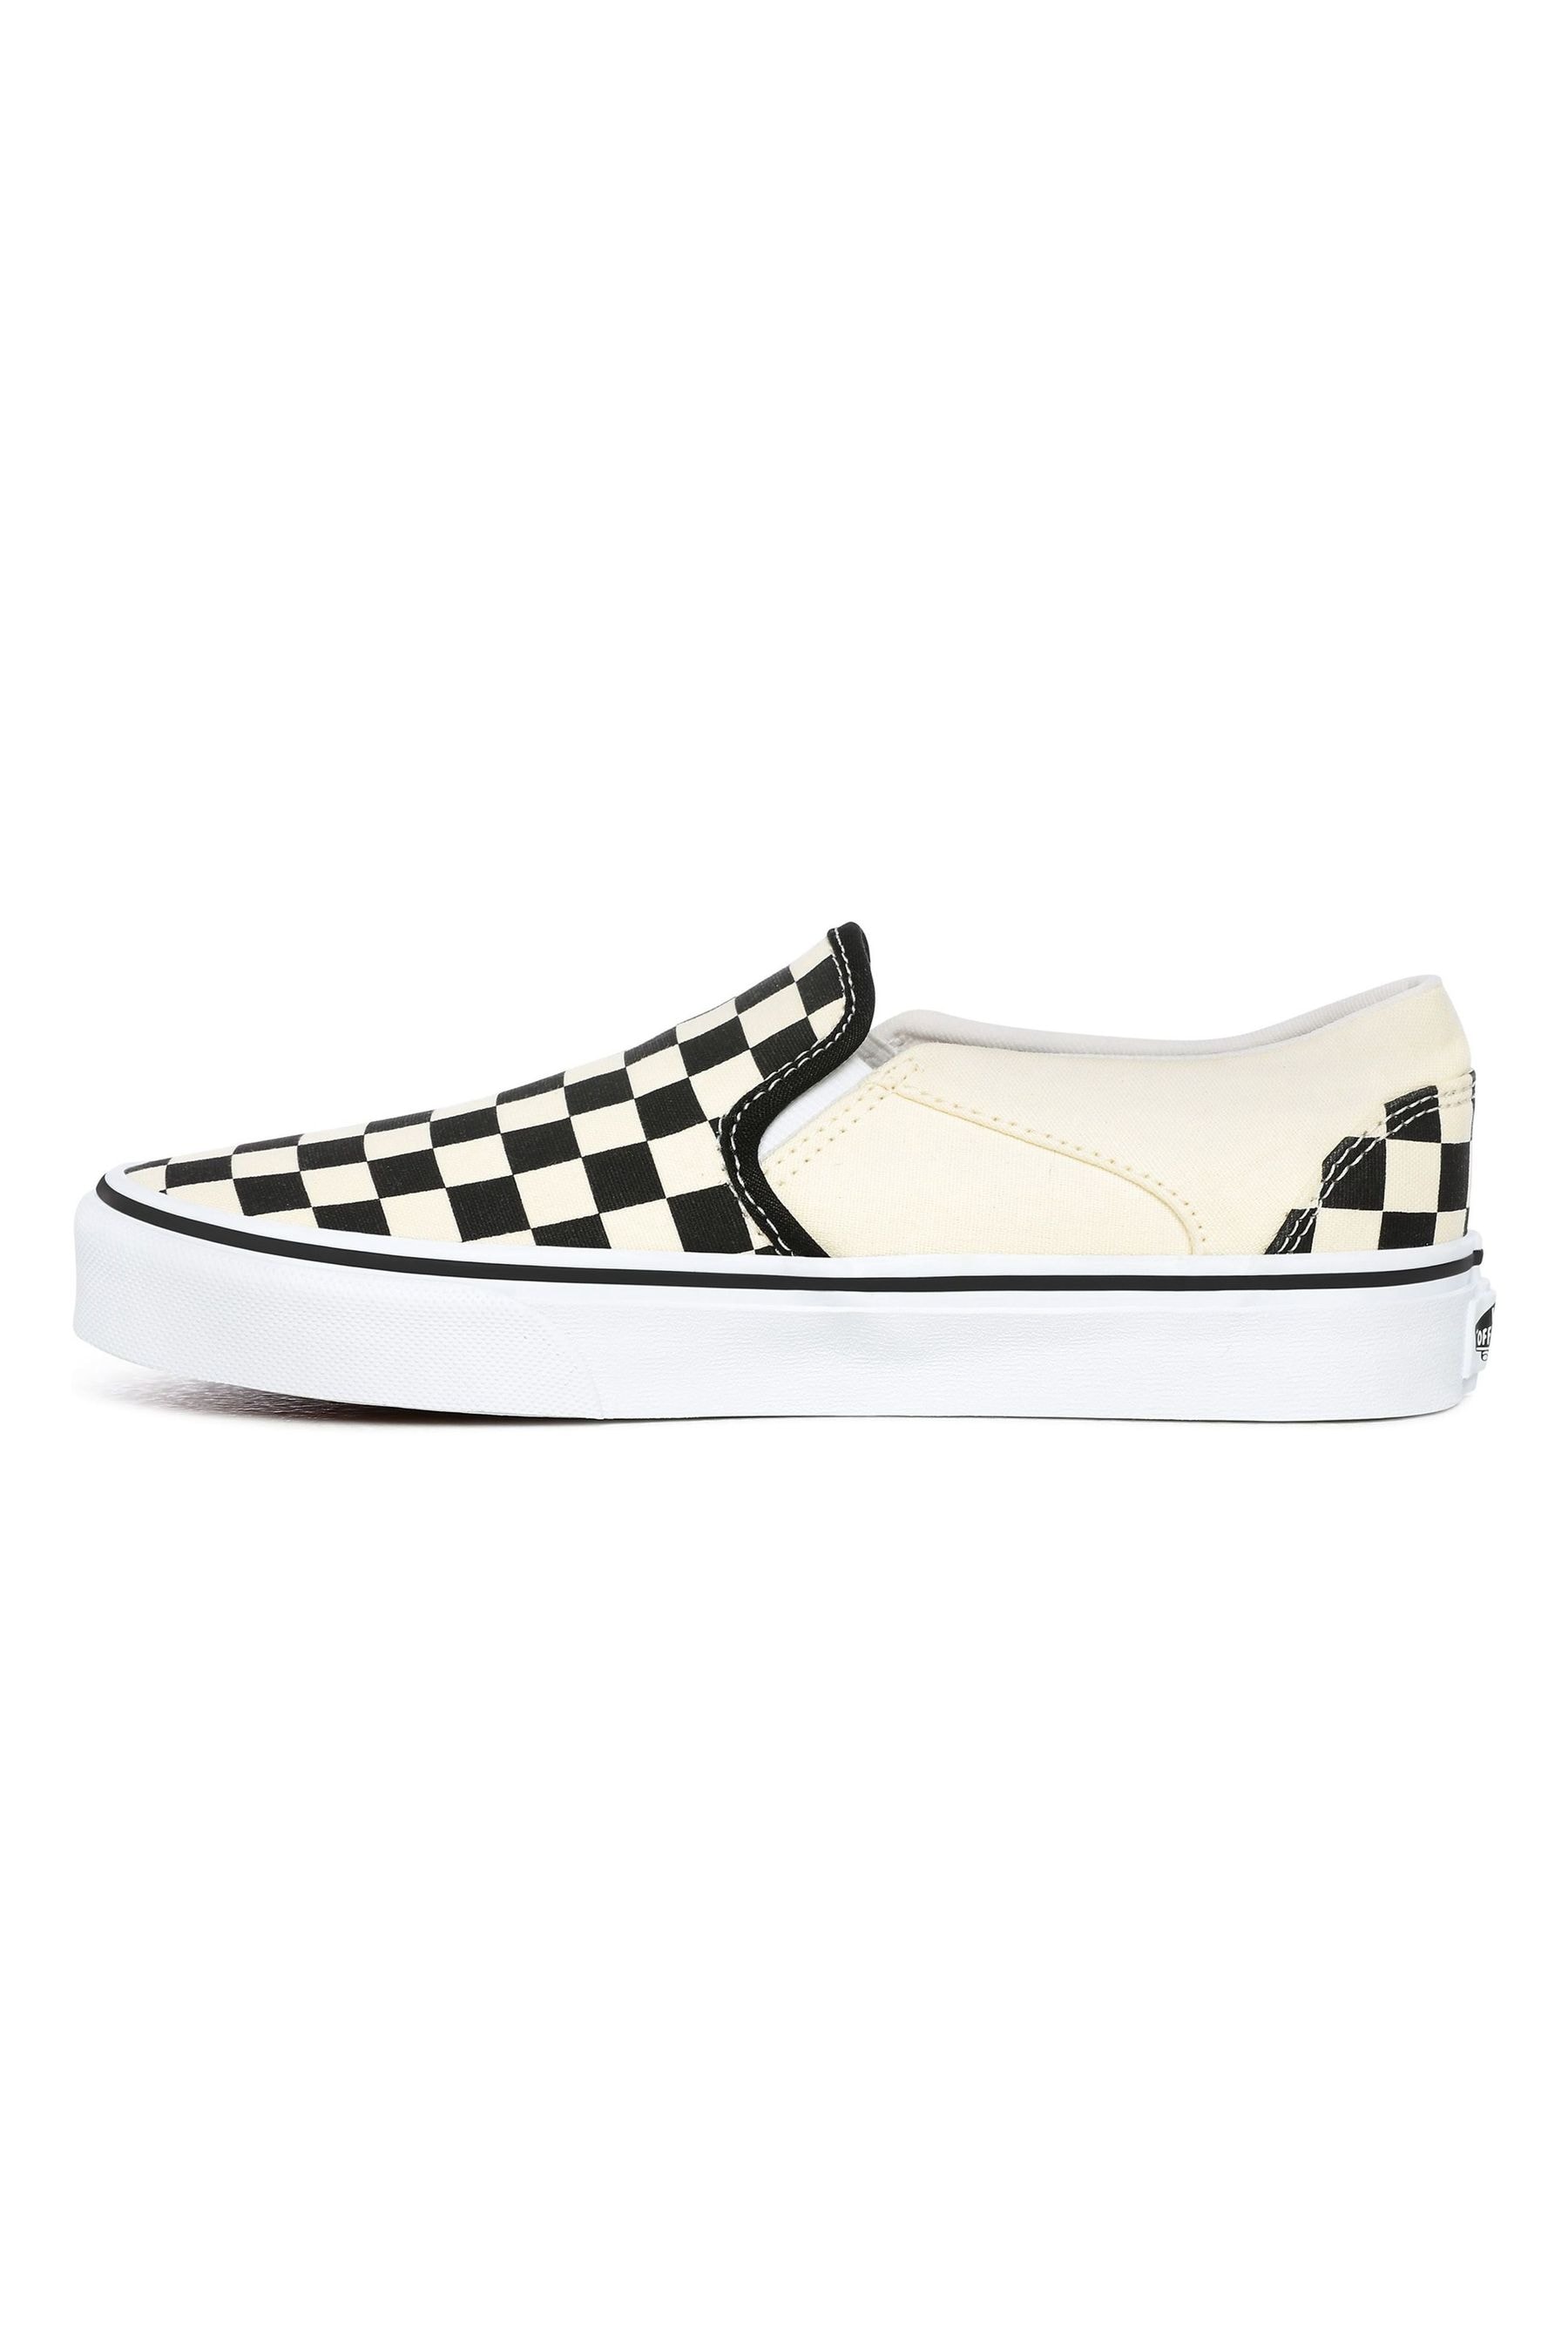 Buy Vans Womens Asher Checkerboard Trainers from the Next UK online shop